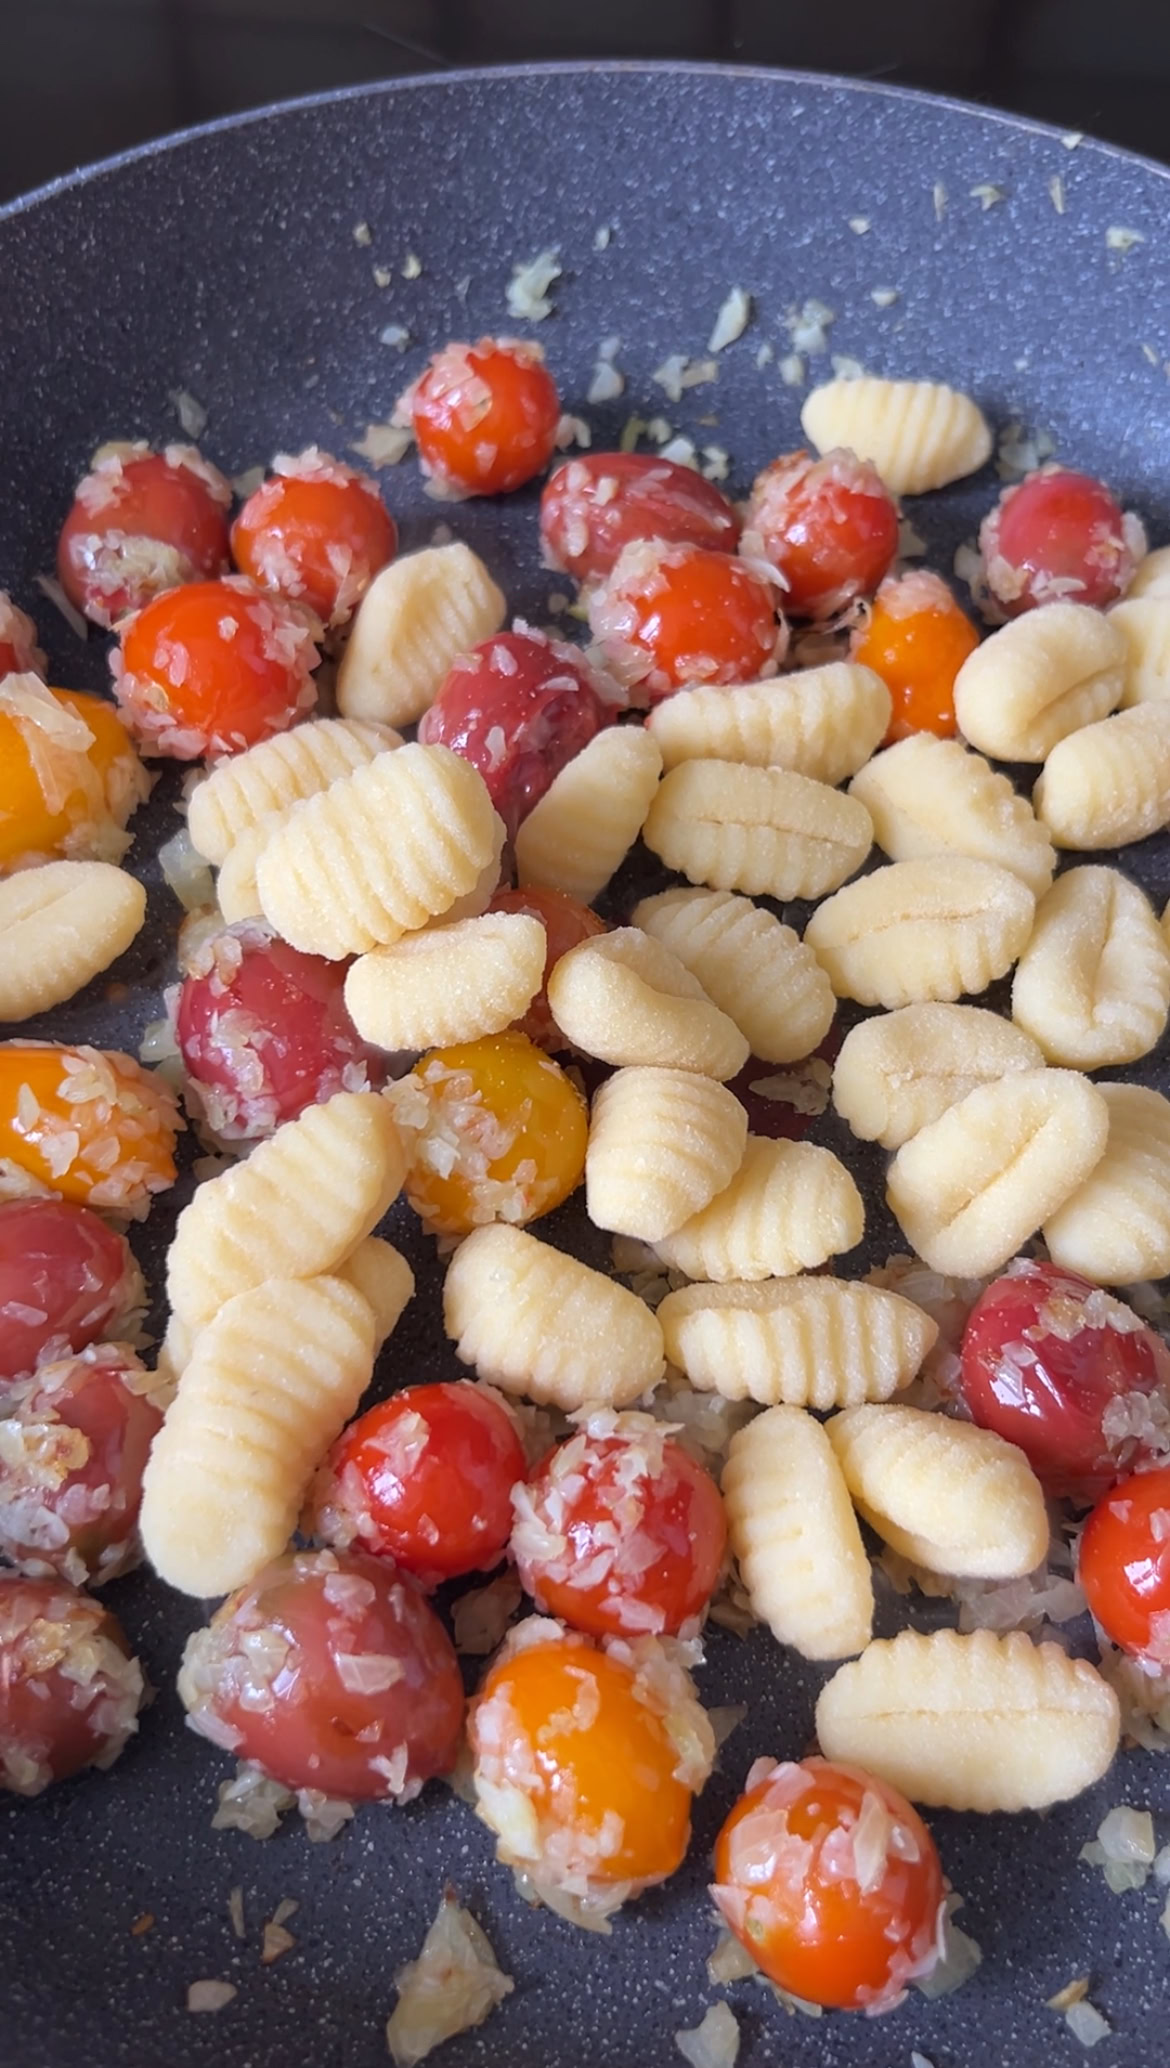 Uncooked gnocchi added to the pan of garlic, onion and cherry tomatoes.